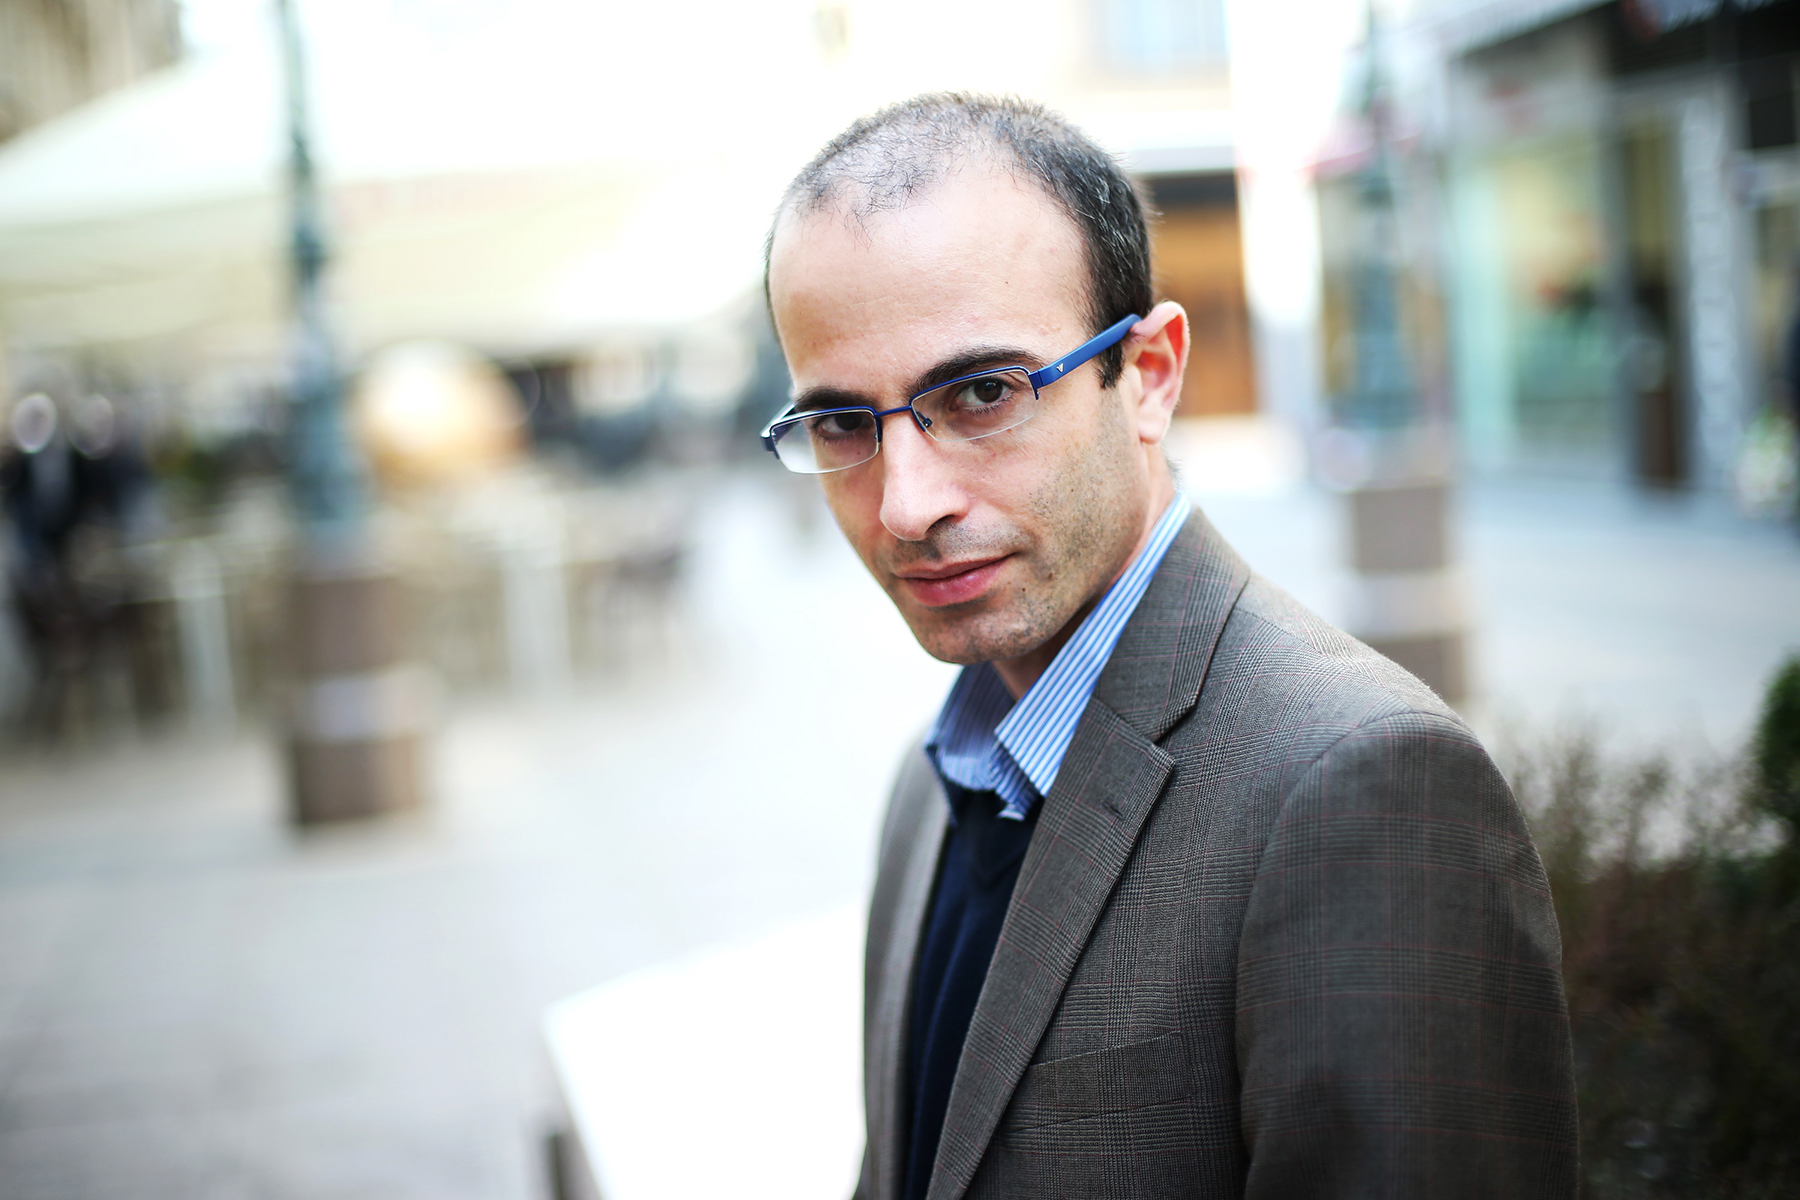 24.03.2015., Zagreb,Croatia - Yuval Noah Harari, Israeli historian and the author of the international bestseller Sapiens: A Brief History of Humankind. He lectures at the Department of History of the Hebrew University of Jerusalem.Photo: Sanjin Strukic/PIXSELL [ Rechtehinweis: picture alliance ]